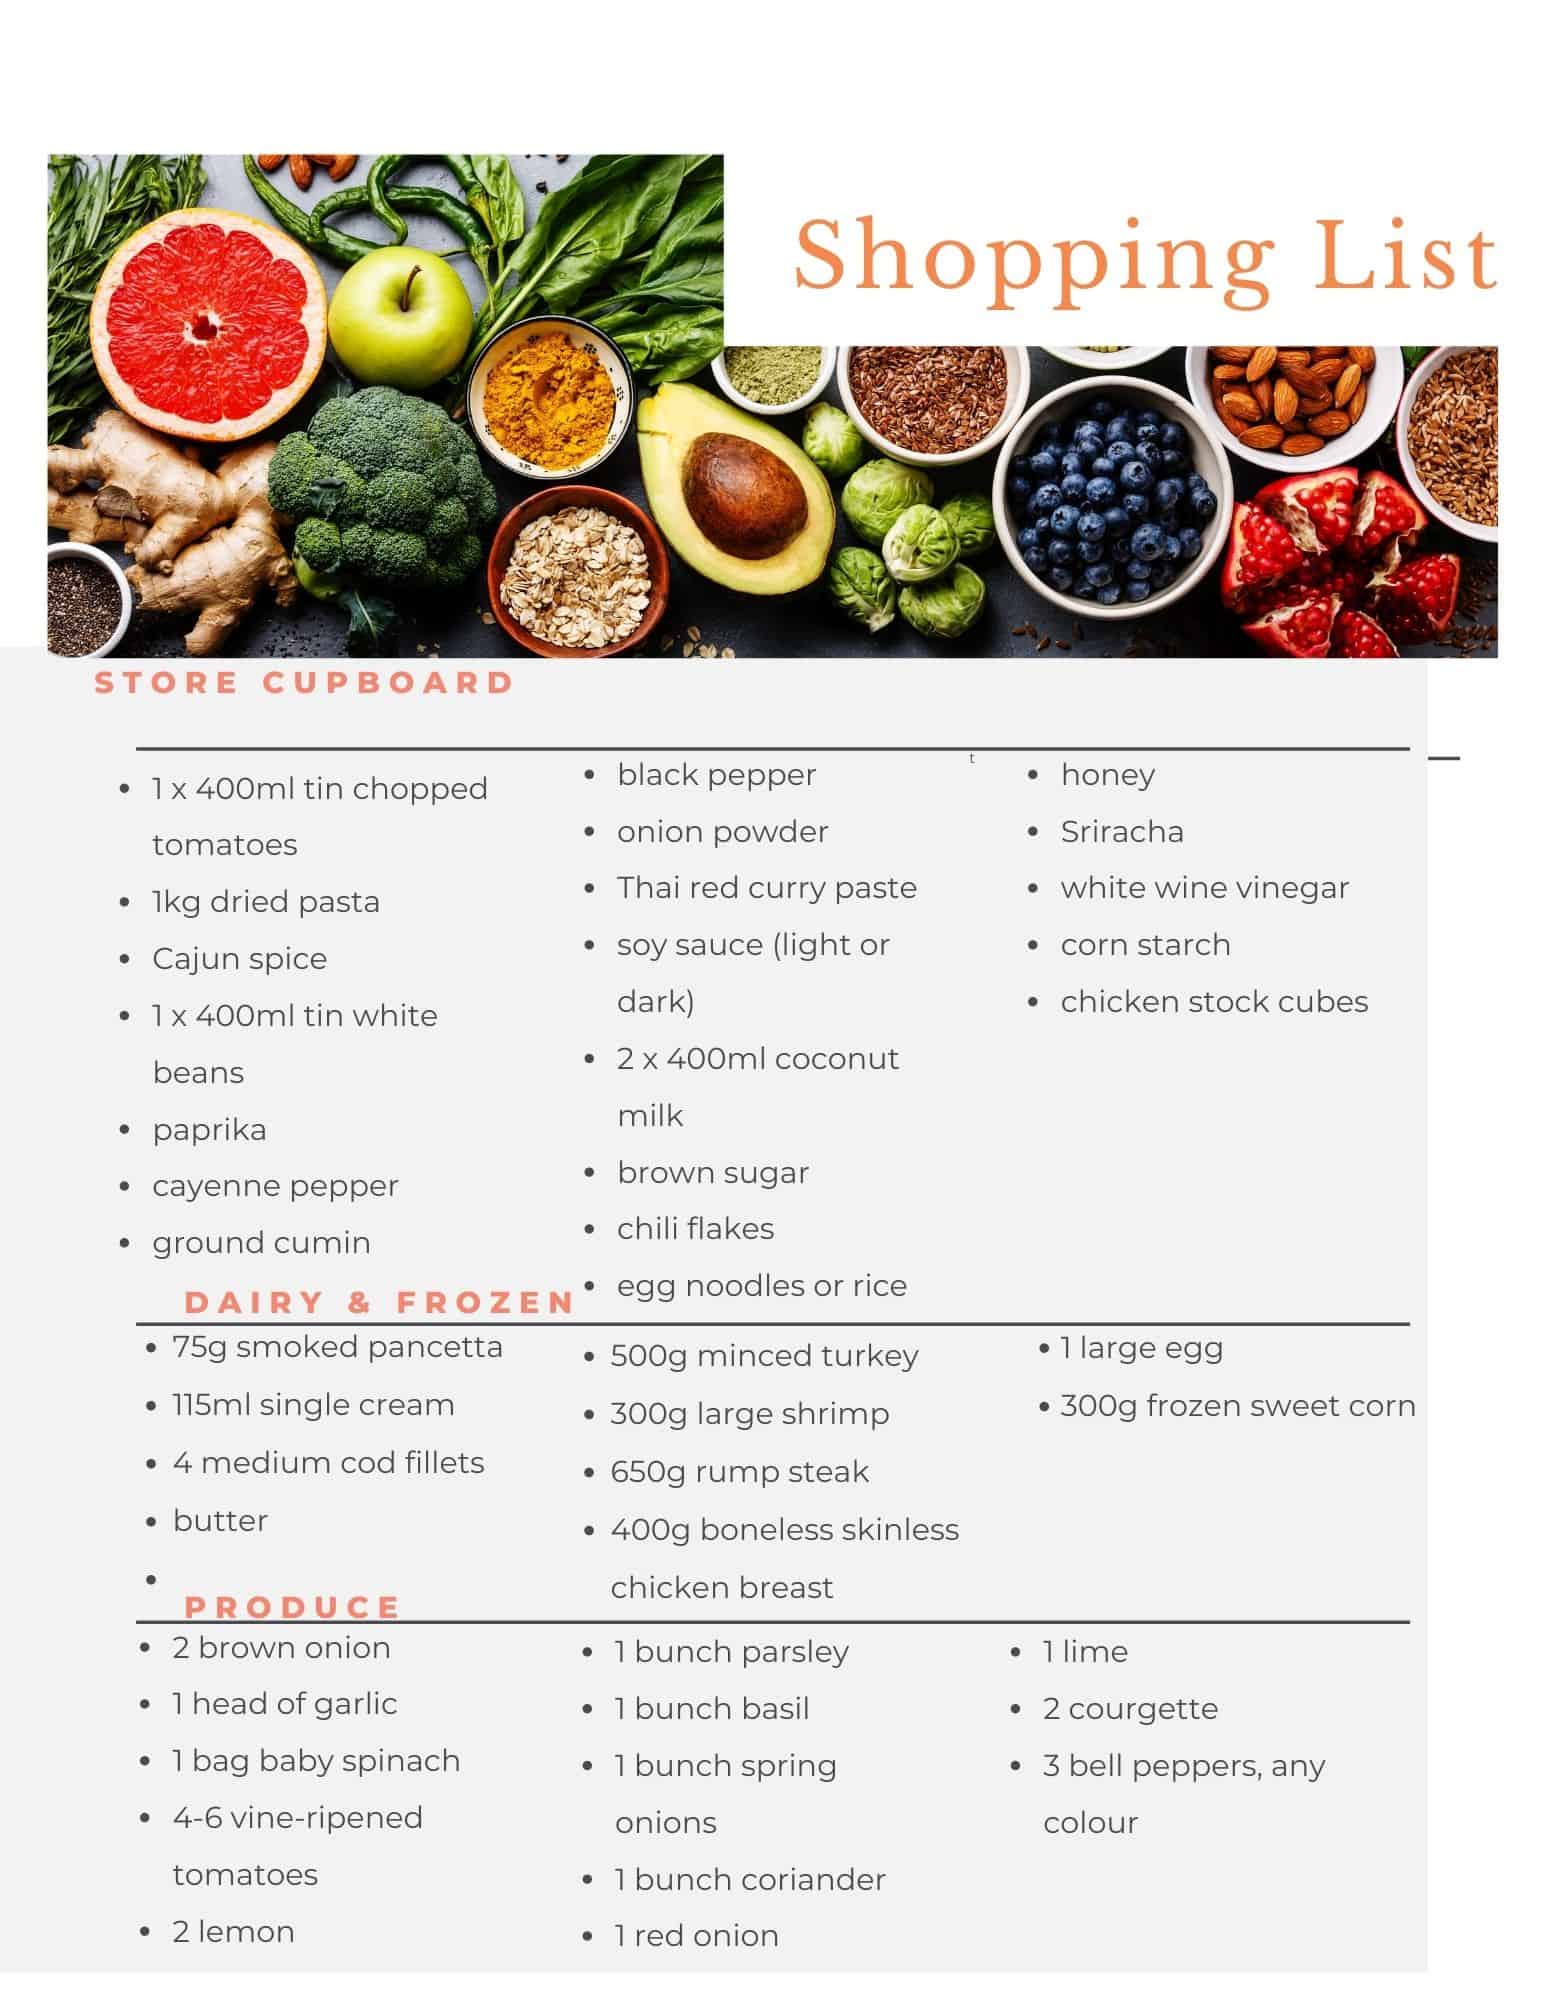 Weekly budget meal plan shopping list.